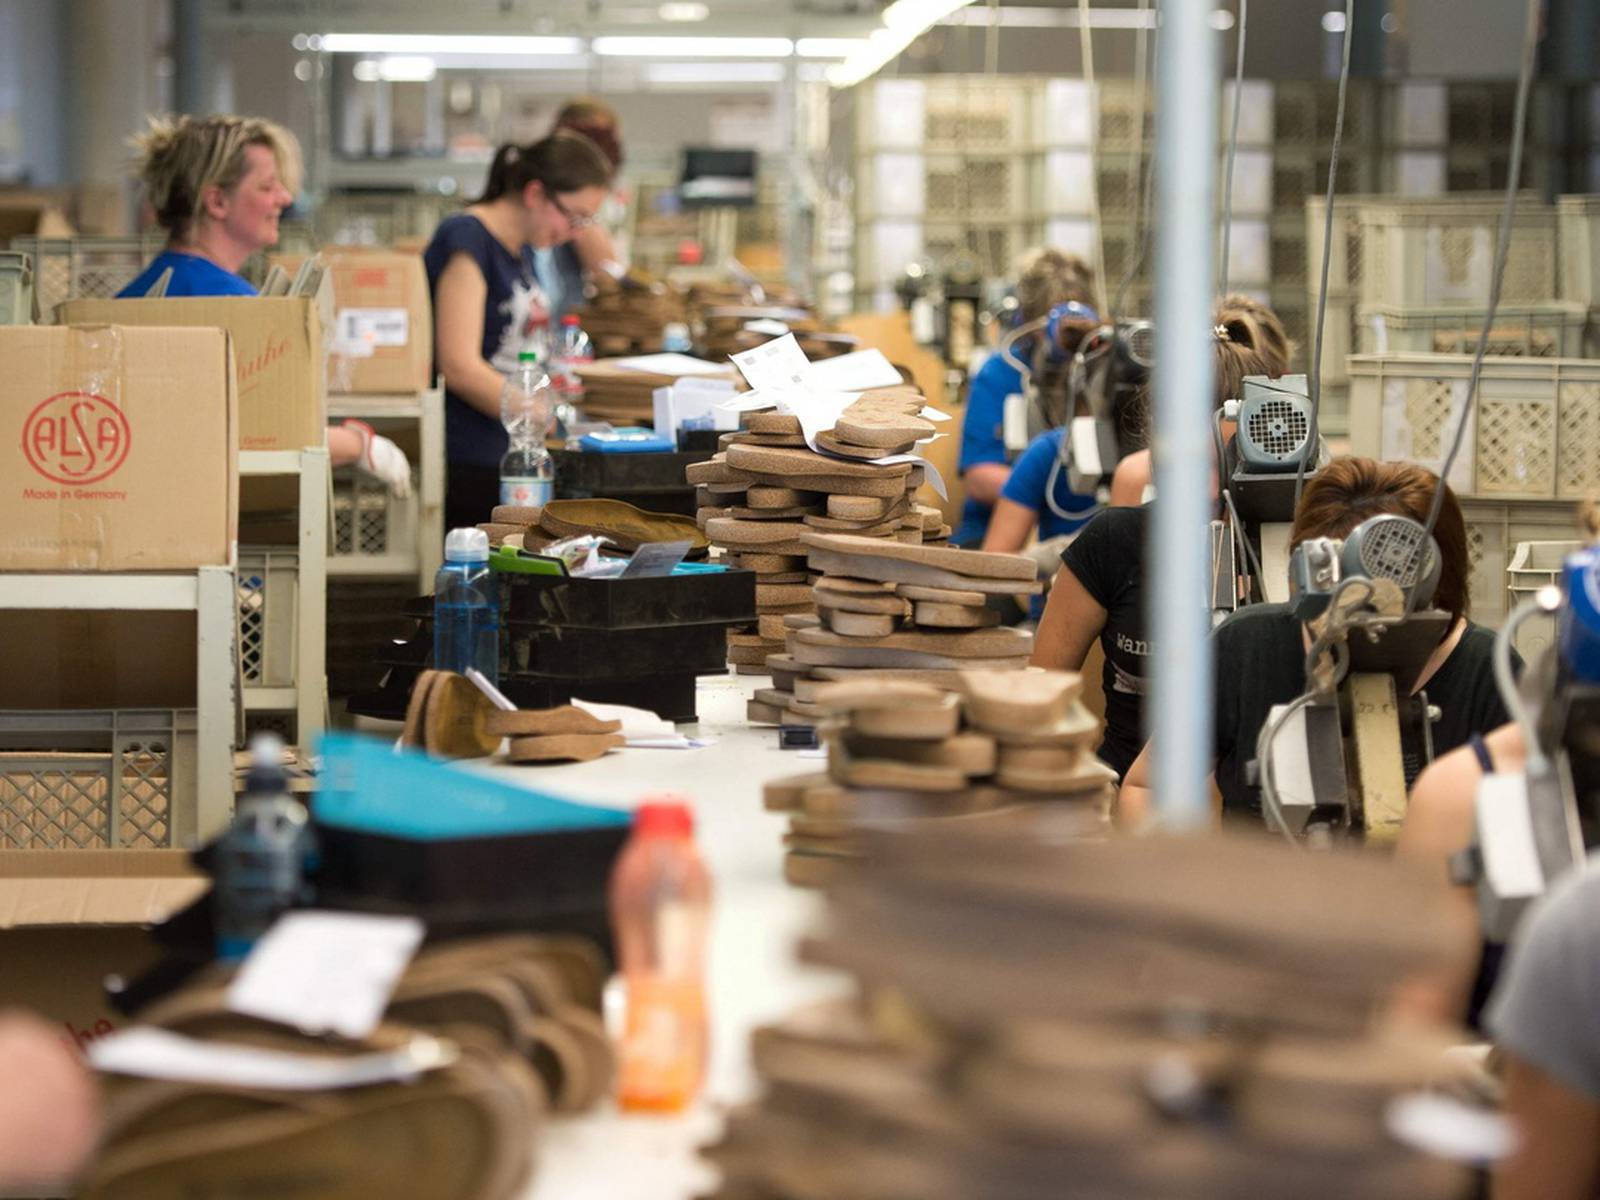 Birkenstock Sold to LVMH-Backed Firm L Catterton